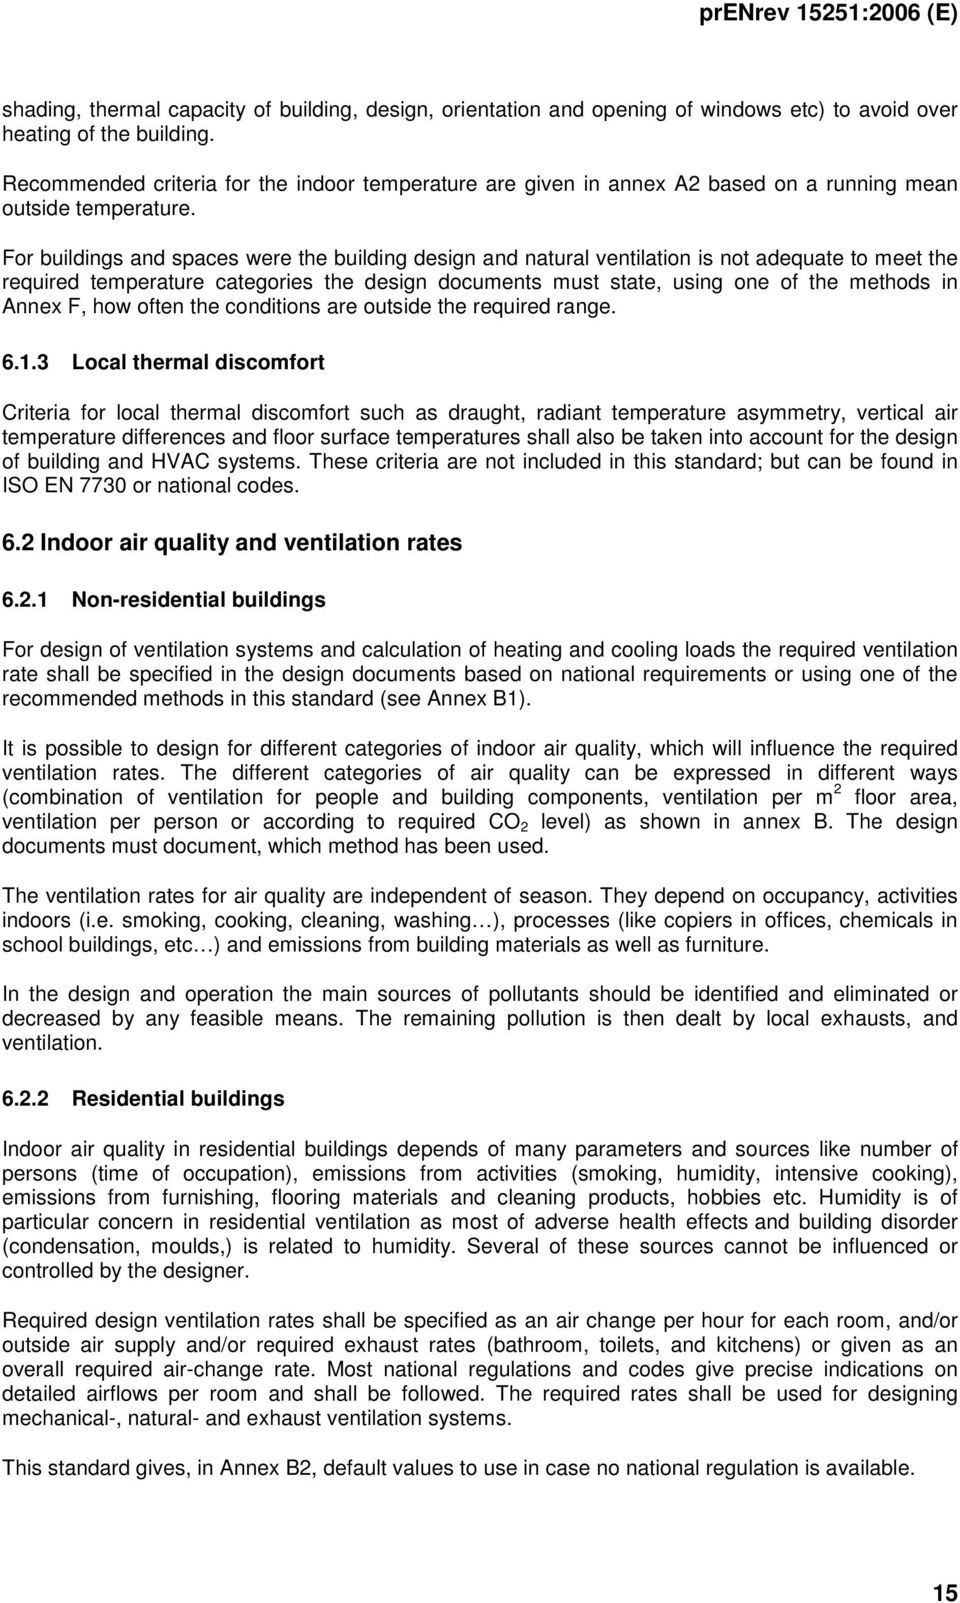 For buildings and spaces were the building design and natural ventilation is not adequate to meet the required temperature categories the design documents must state, using one of the methods in